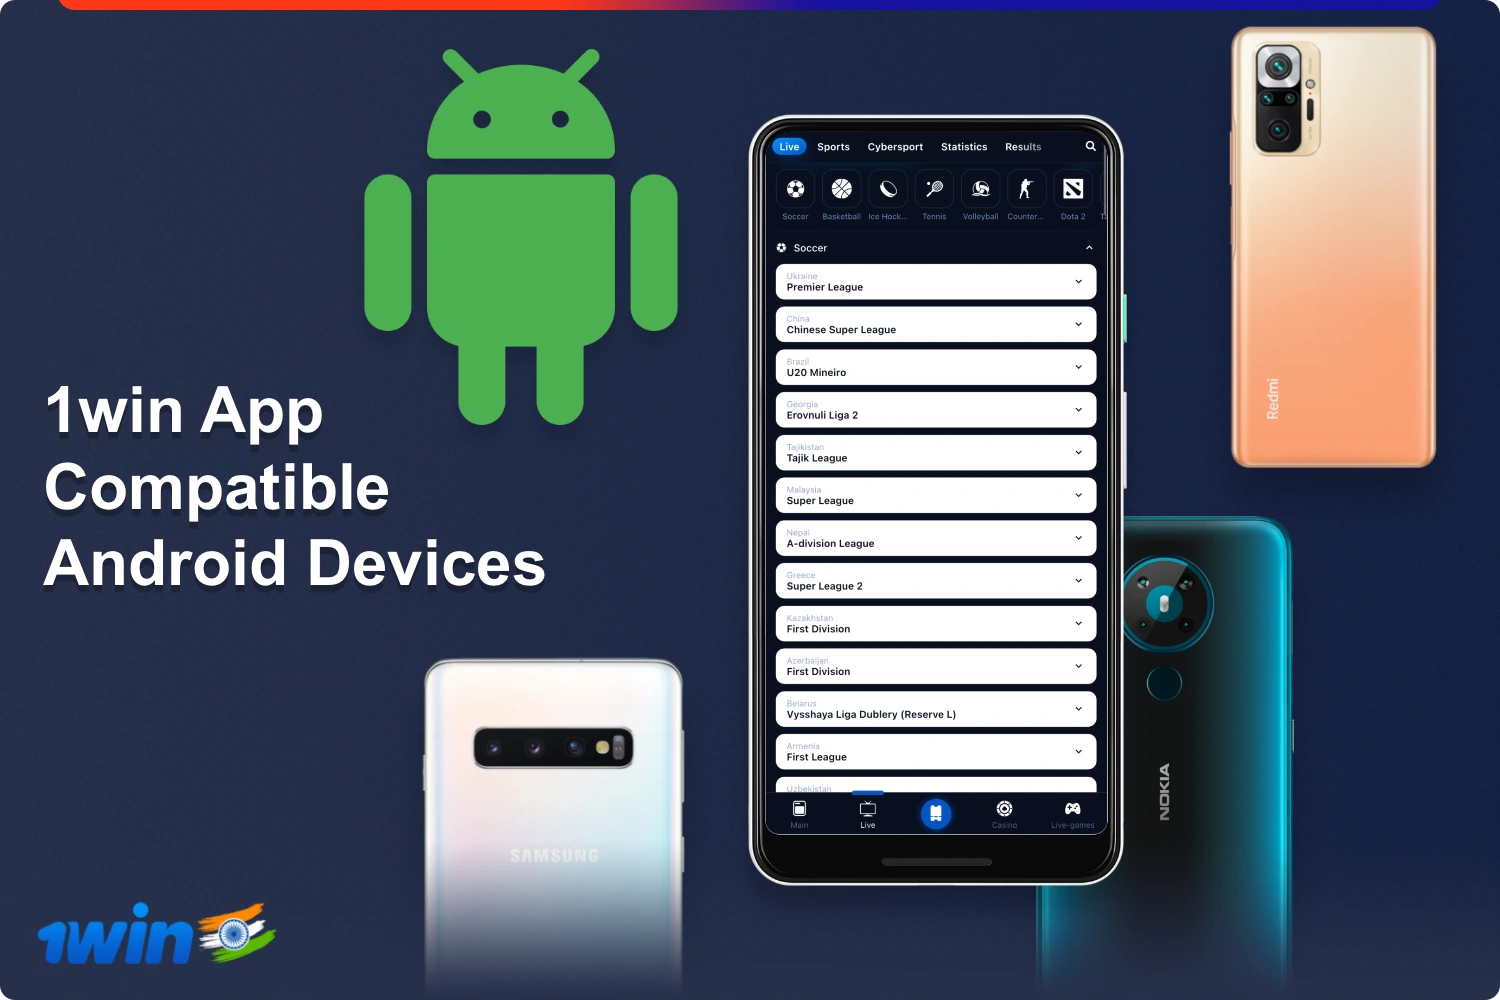 1win mobile app for Android is compatible with hundreds of smartphone models from different manufacturers